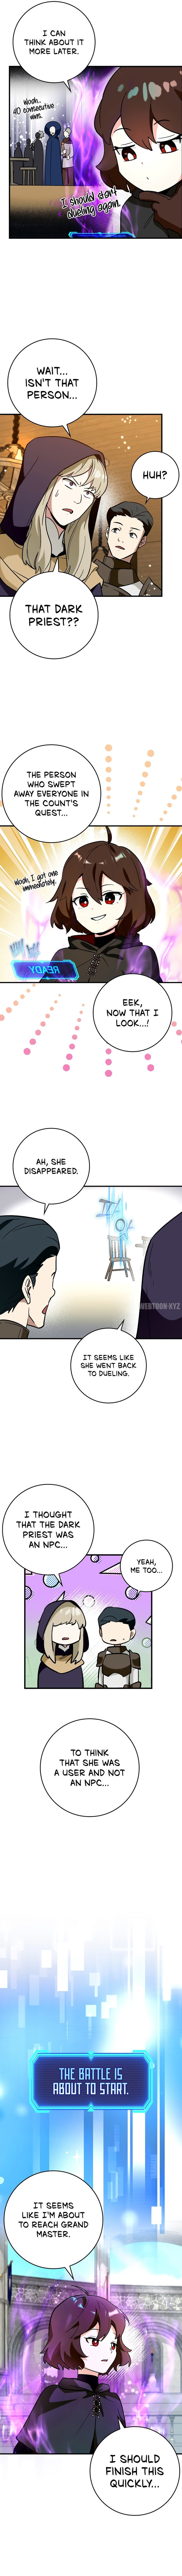 hard-carry-support-chap-26-2